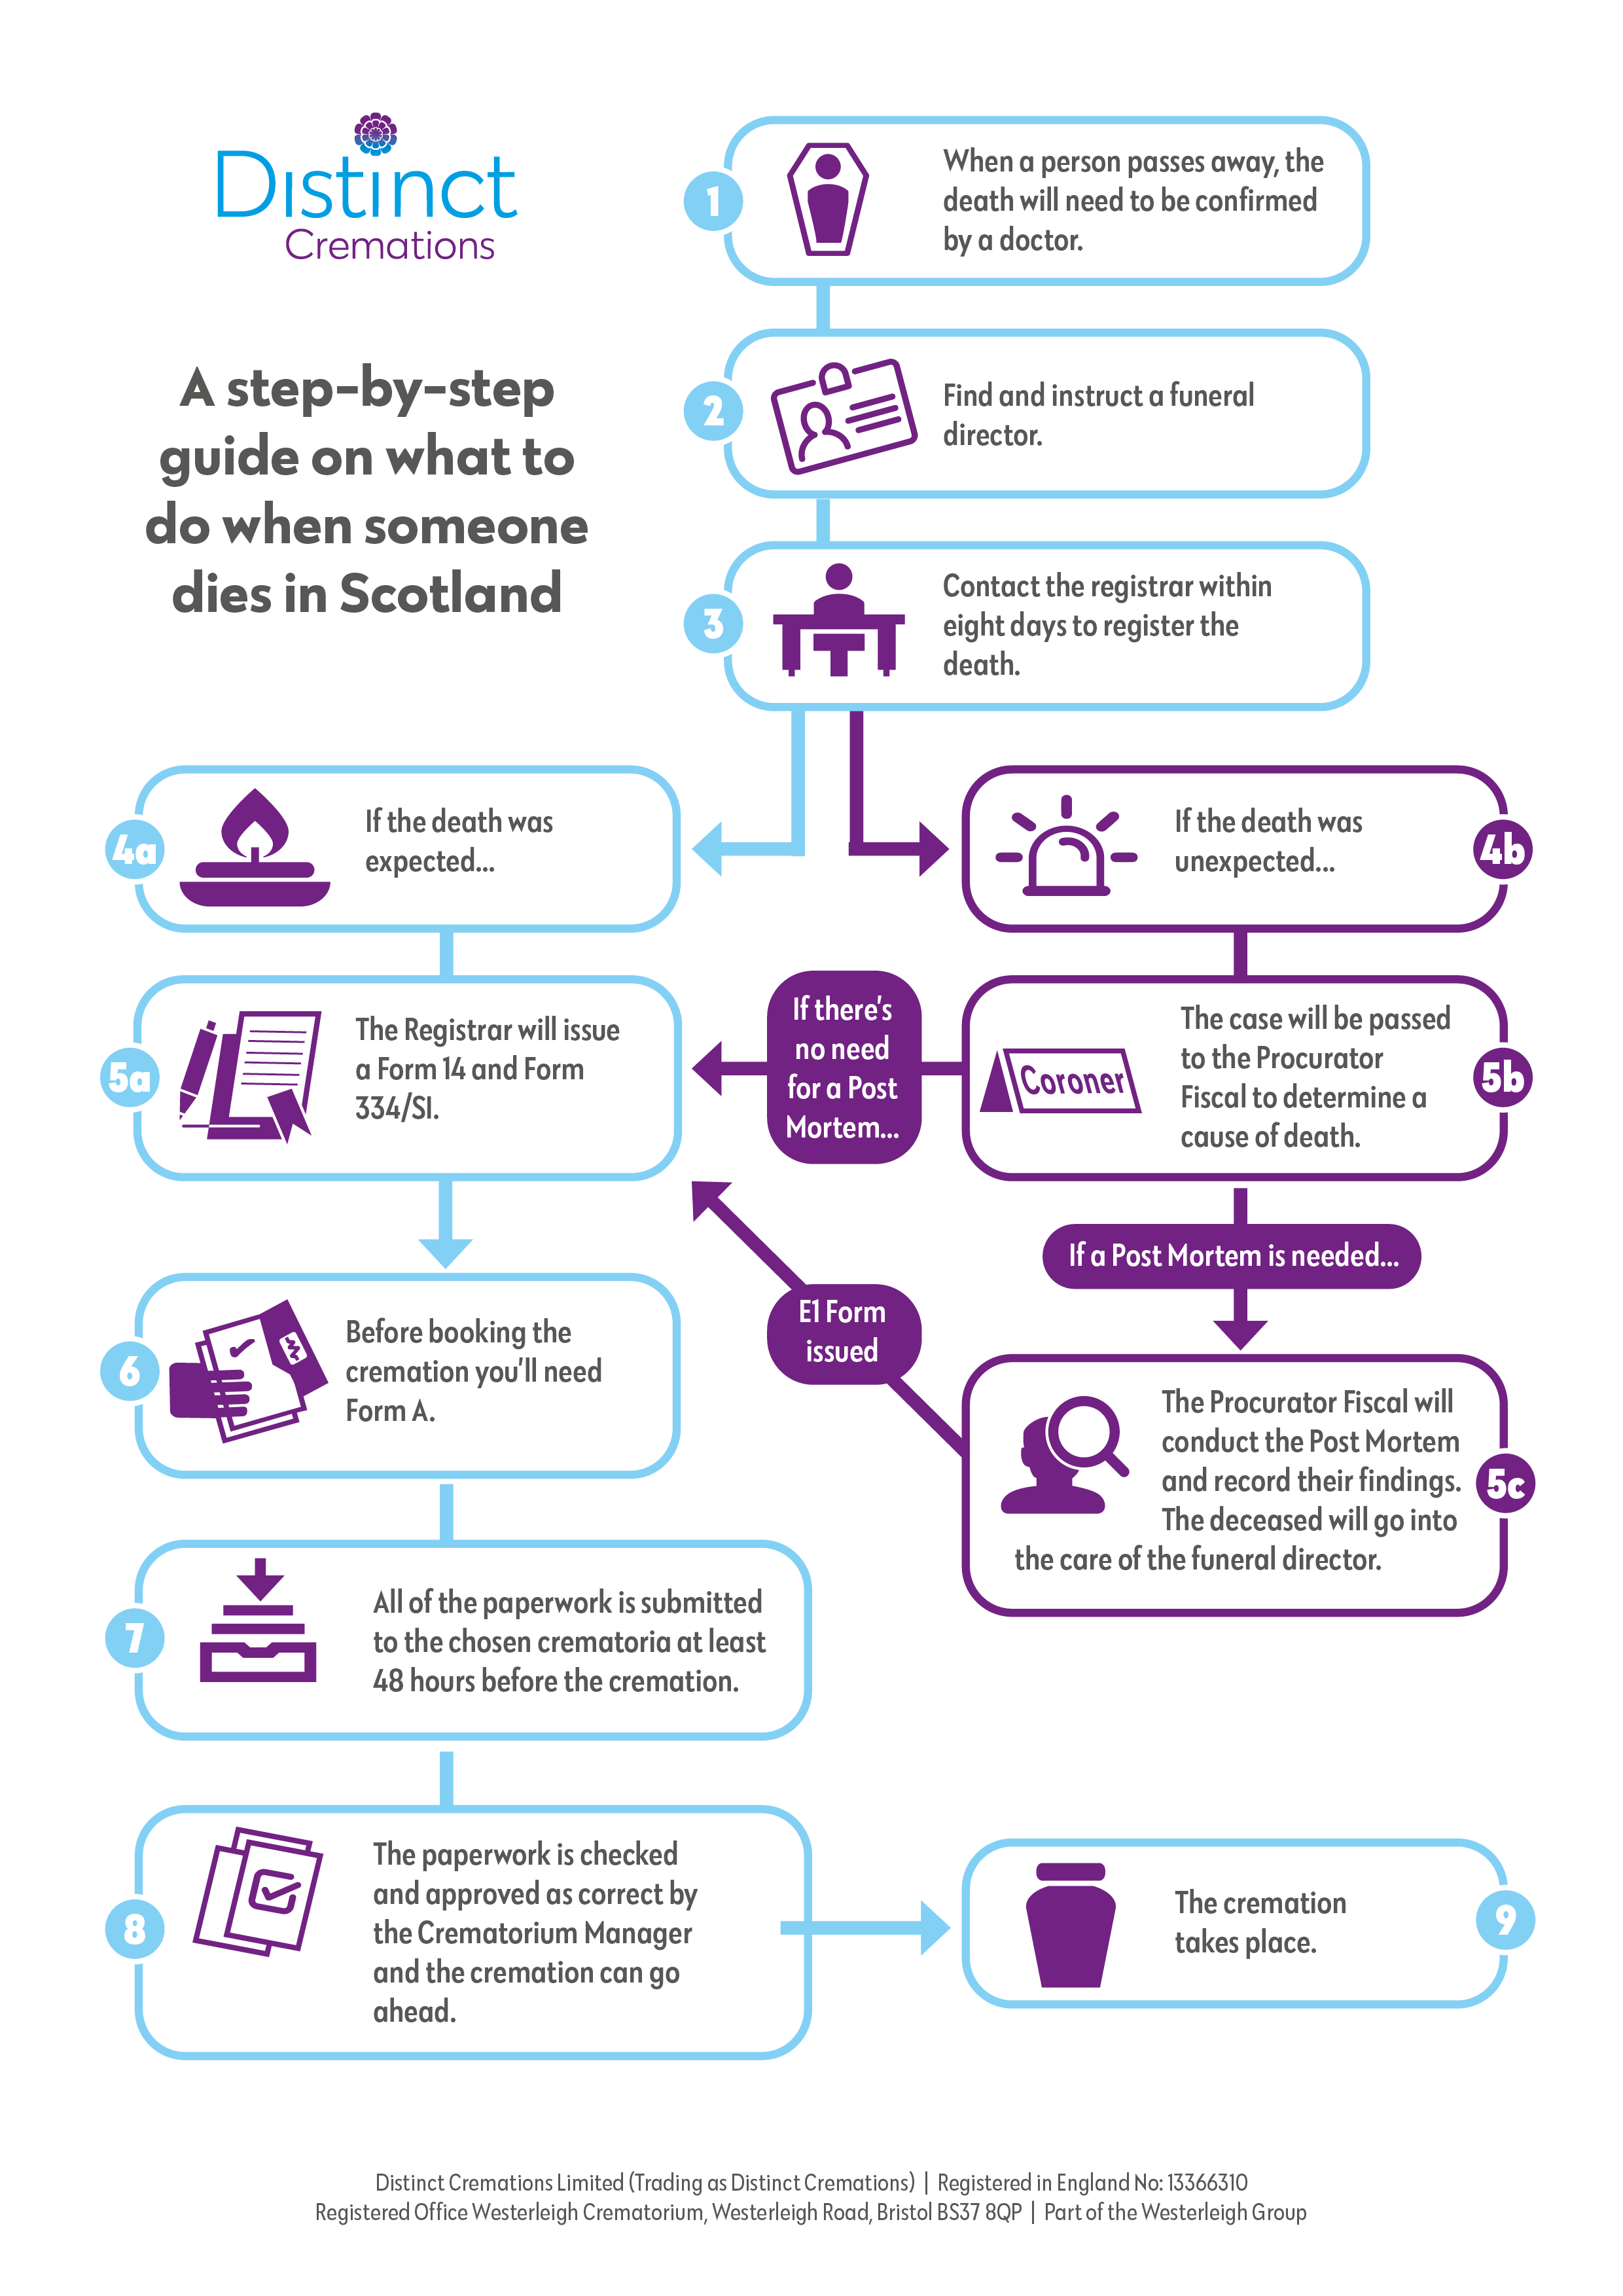 What to do when someone dies in Scotland